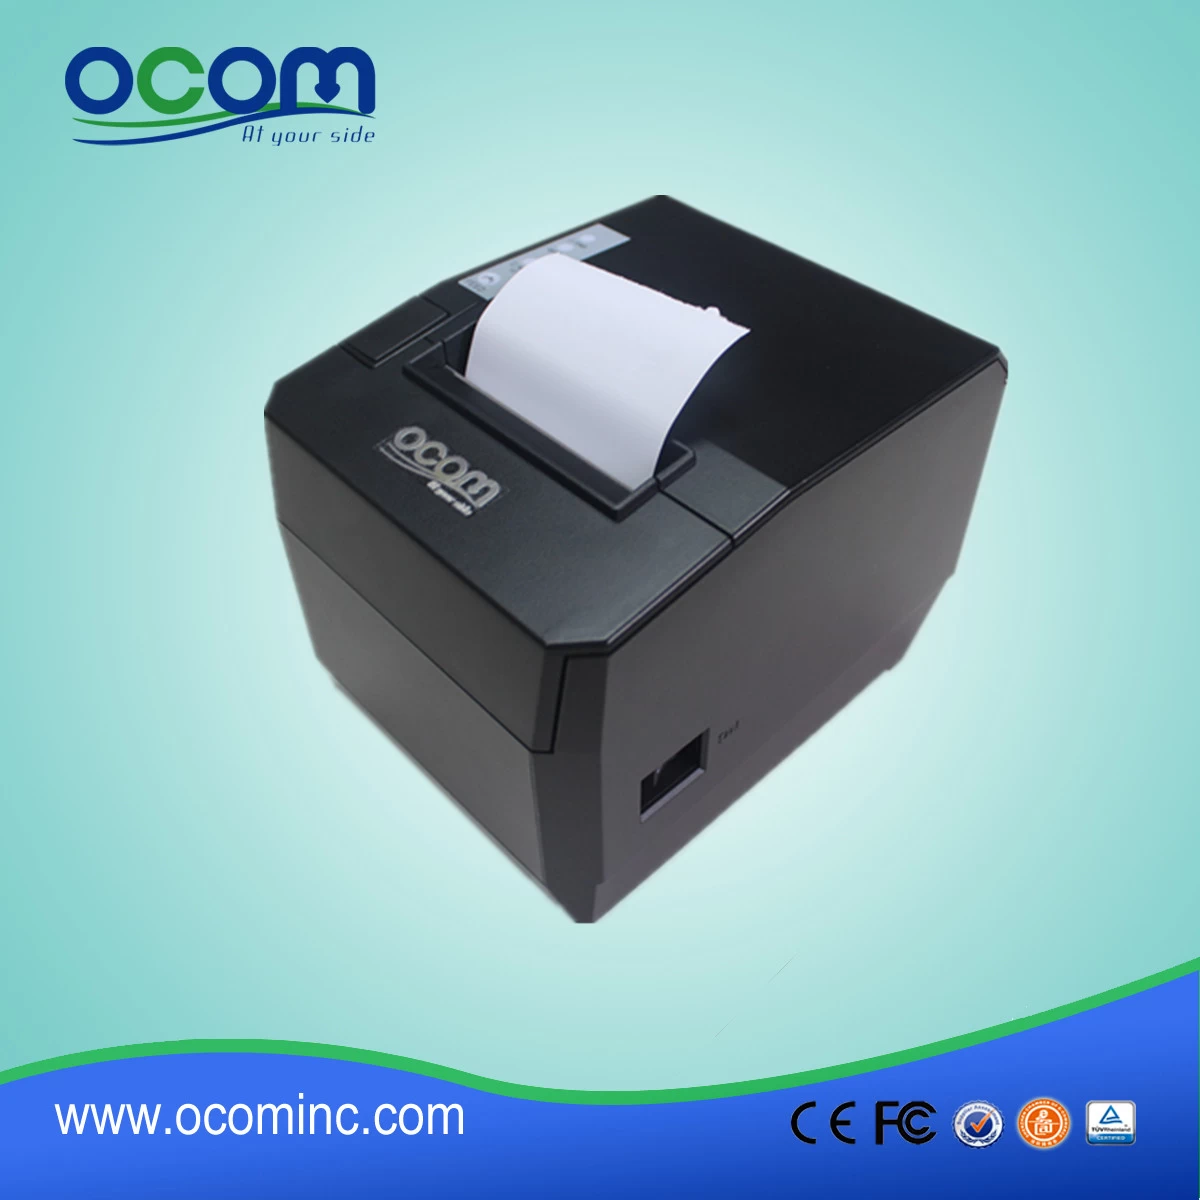 80mm thermal  printer android (OCPP-88A)